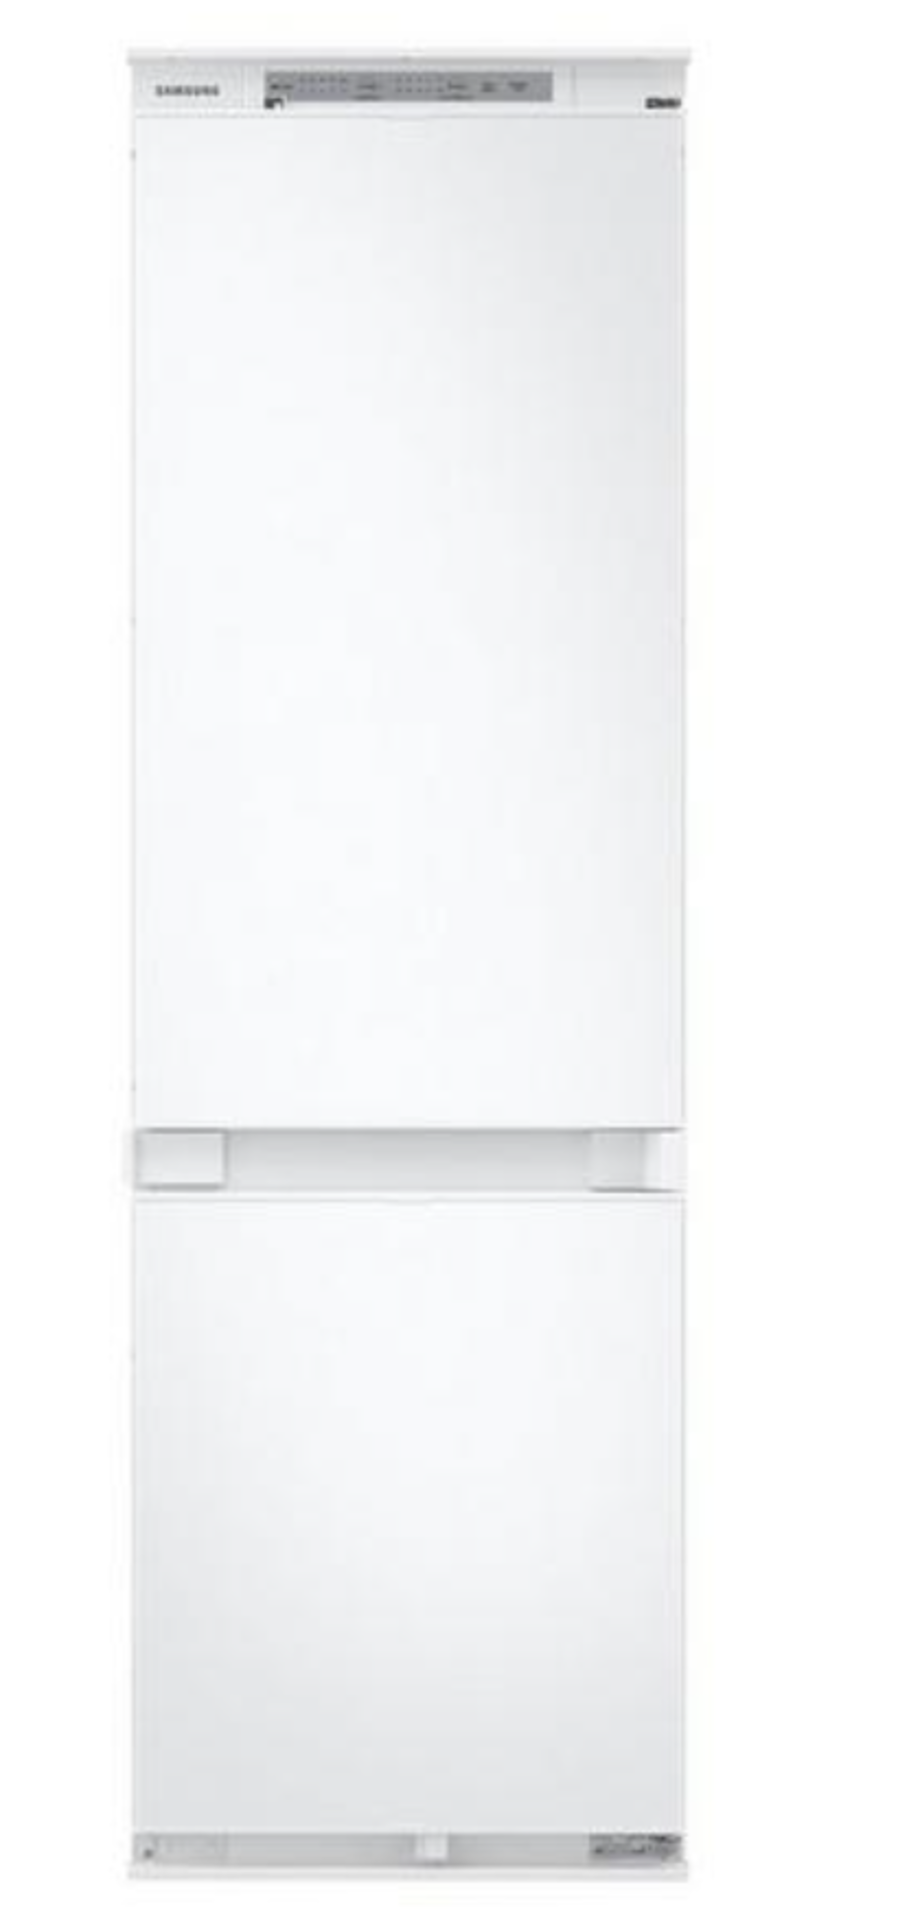 Samsung BRB26600FWW/EU Integrated Fridge Freezer with Total No Frost - White. - R14. RRP £999.00. It